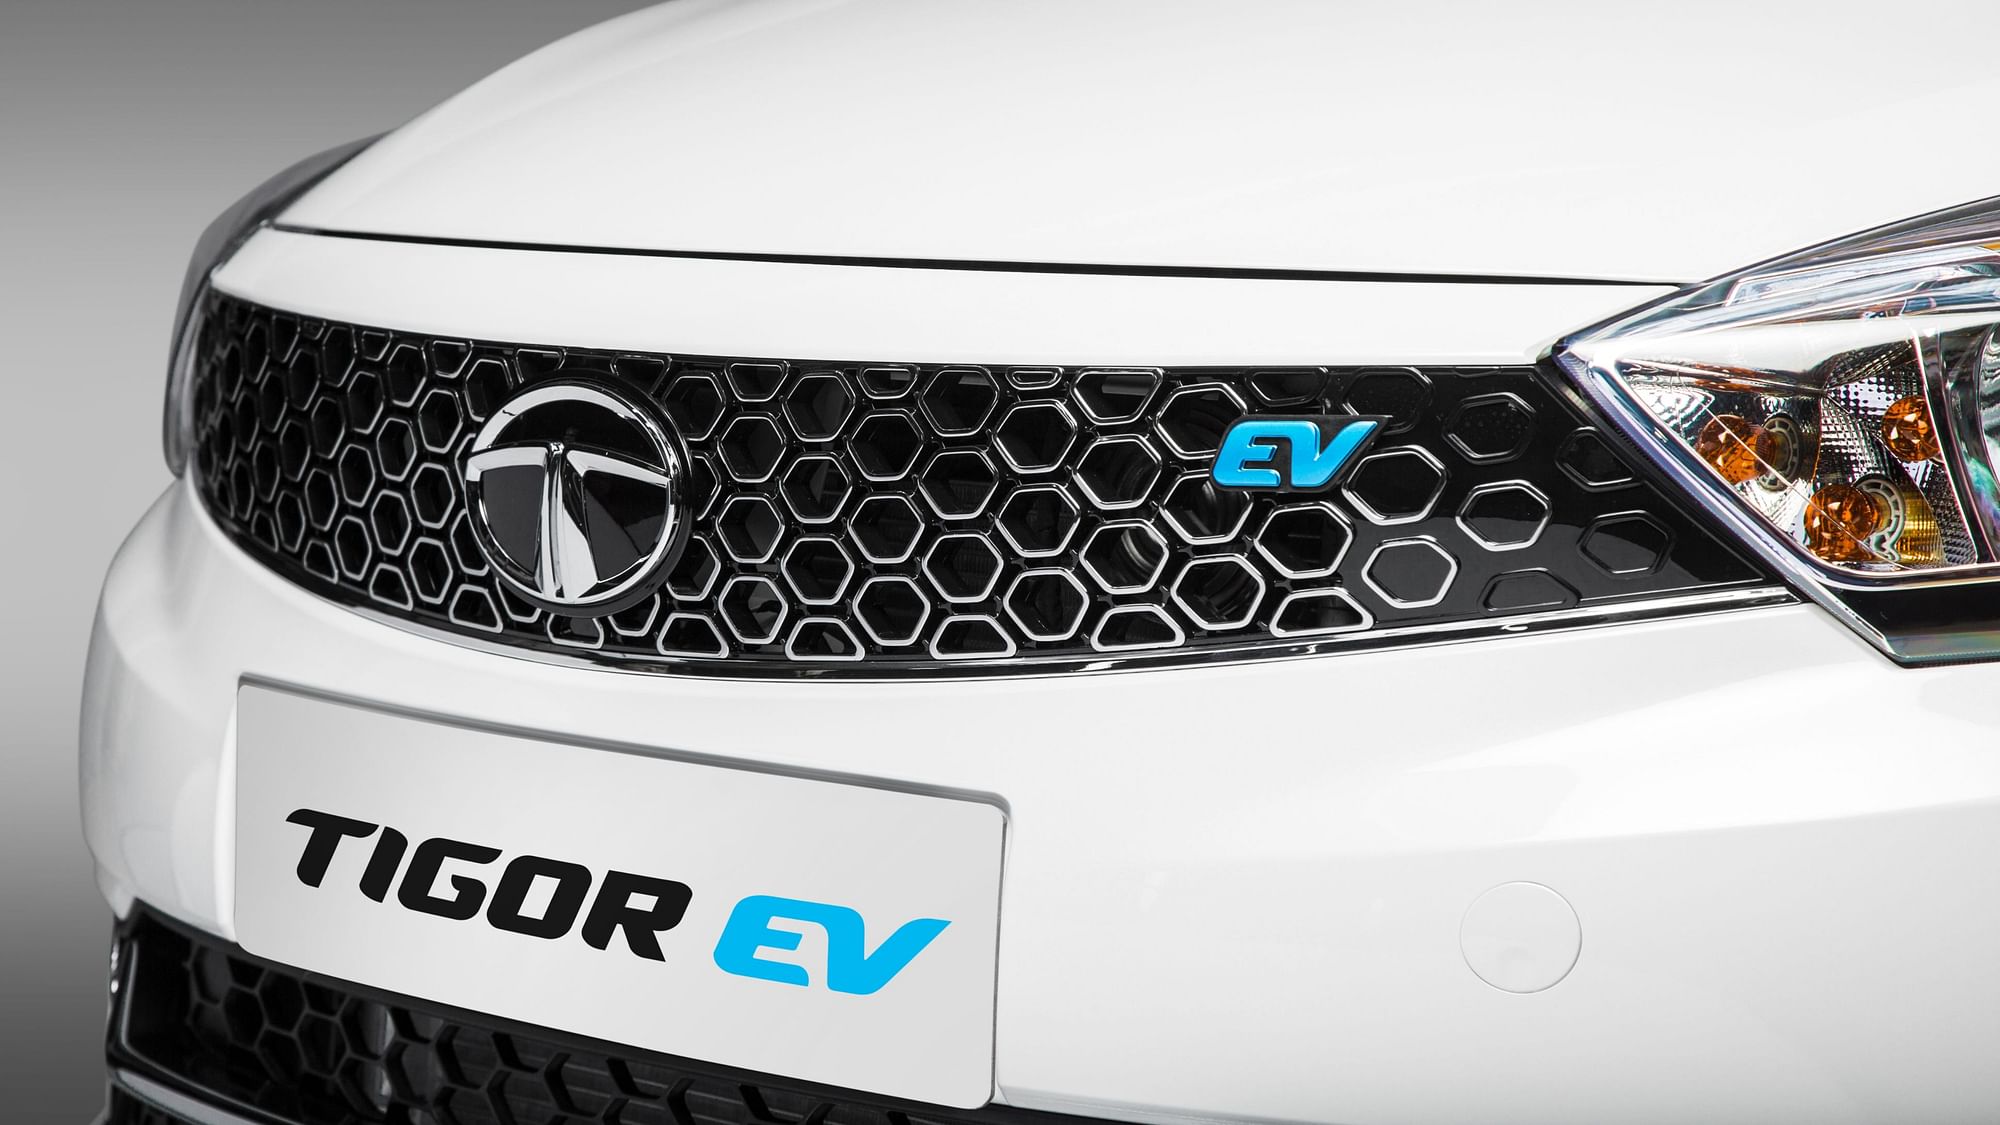 With extended driving range, Tigor EV is now eligible for FAME II subsidies.